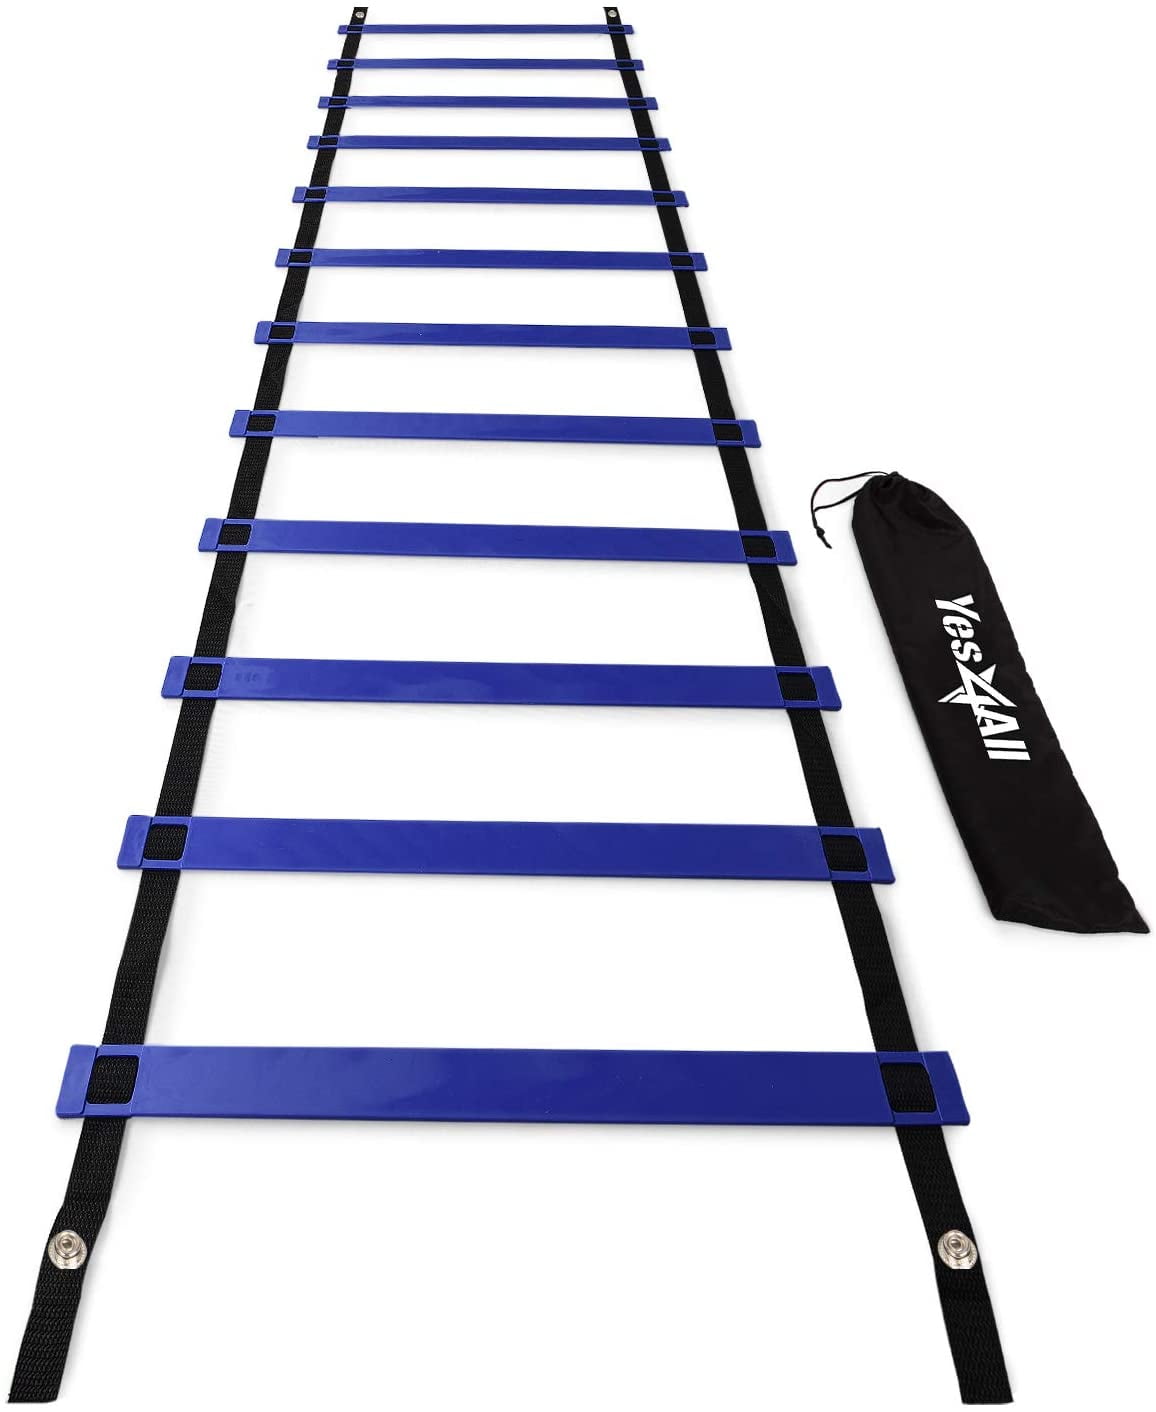 12 20 Rungs with Multi Colors 8 Speed Ladder for Kids and Adults Yes4All Ultimate Agility Ladder Speed Training Equipment Included Carry Bag 